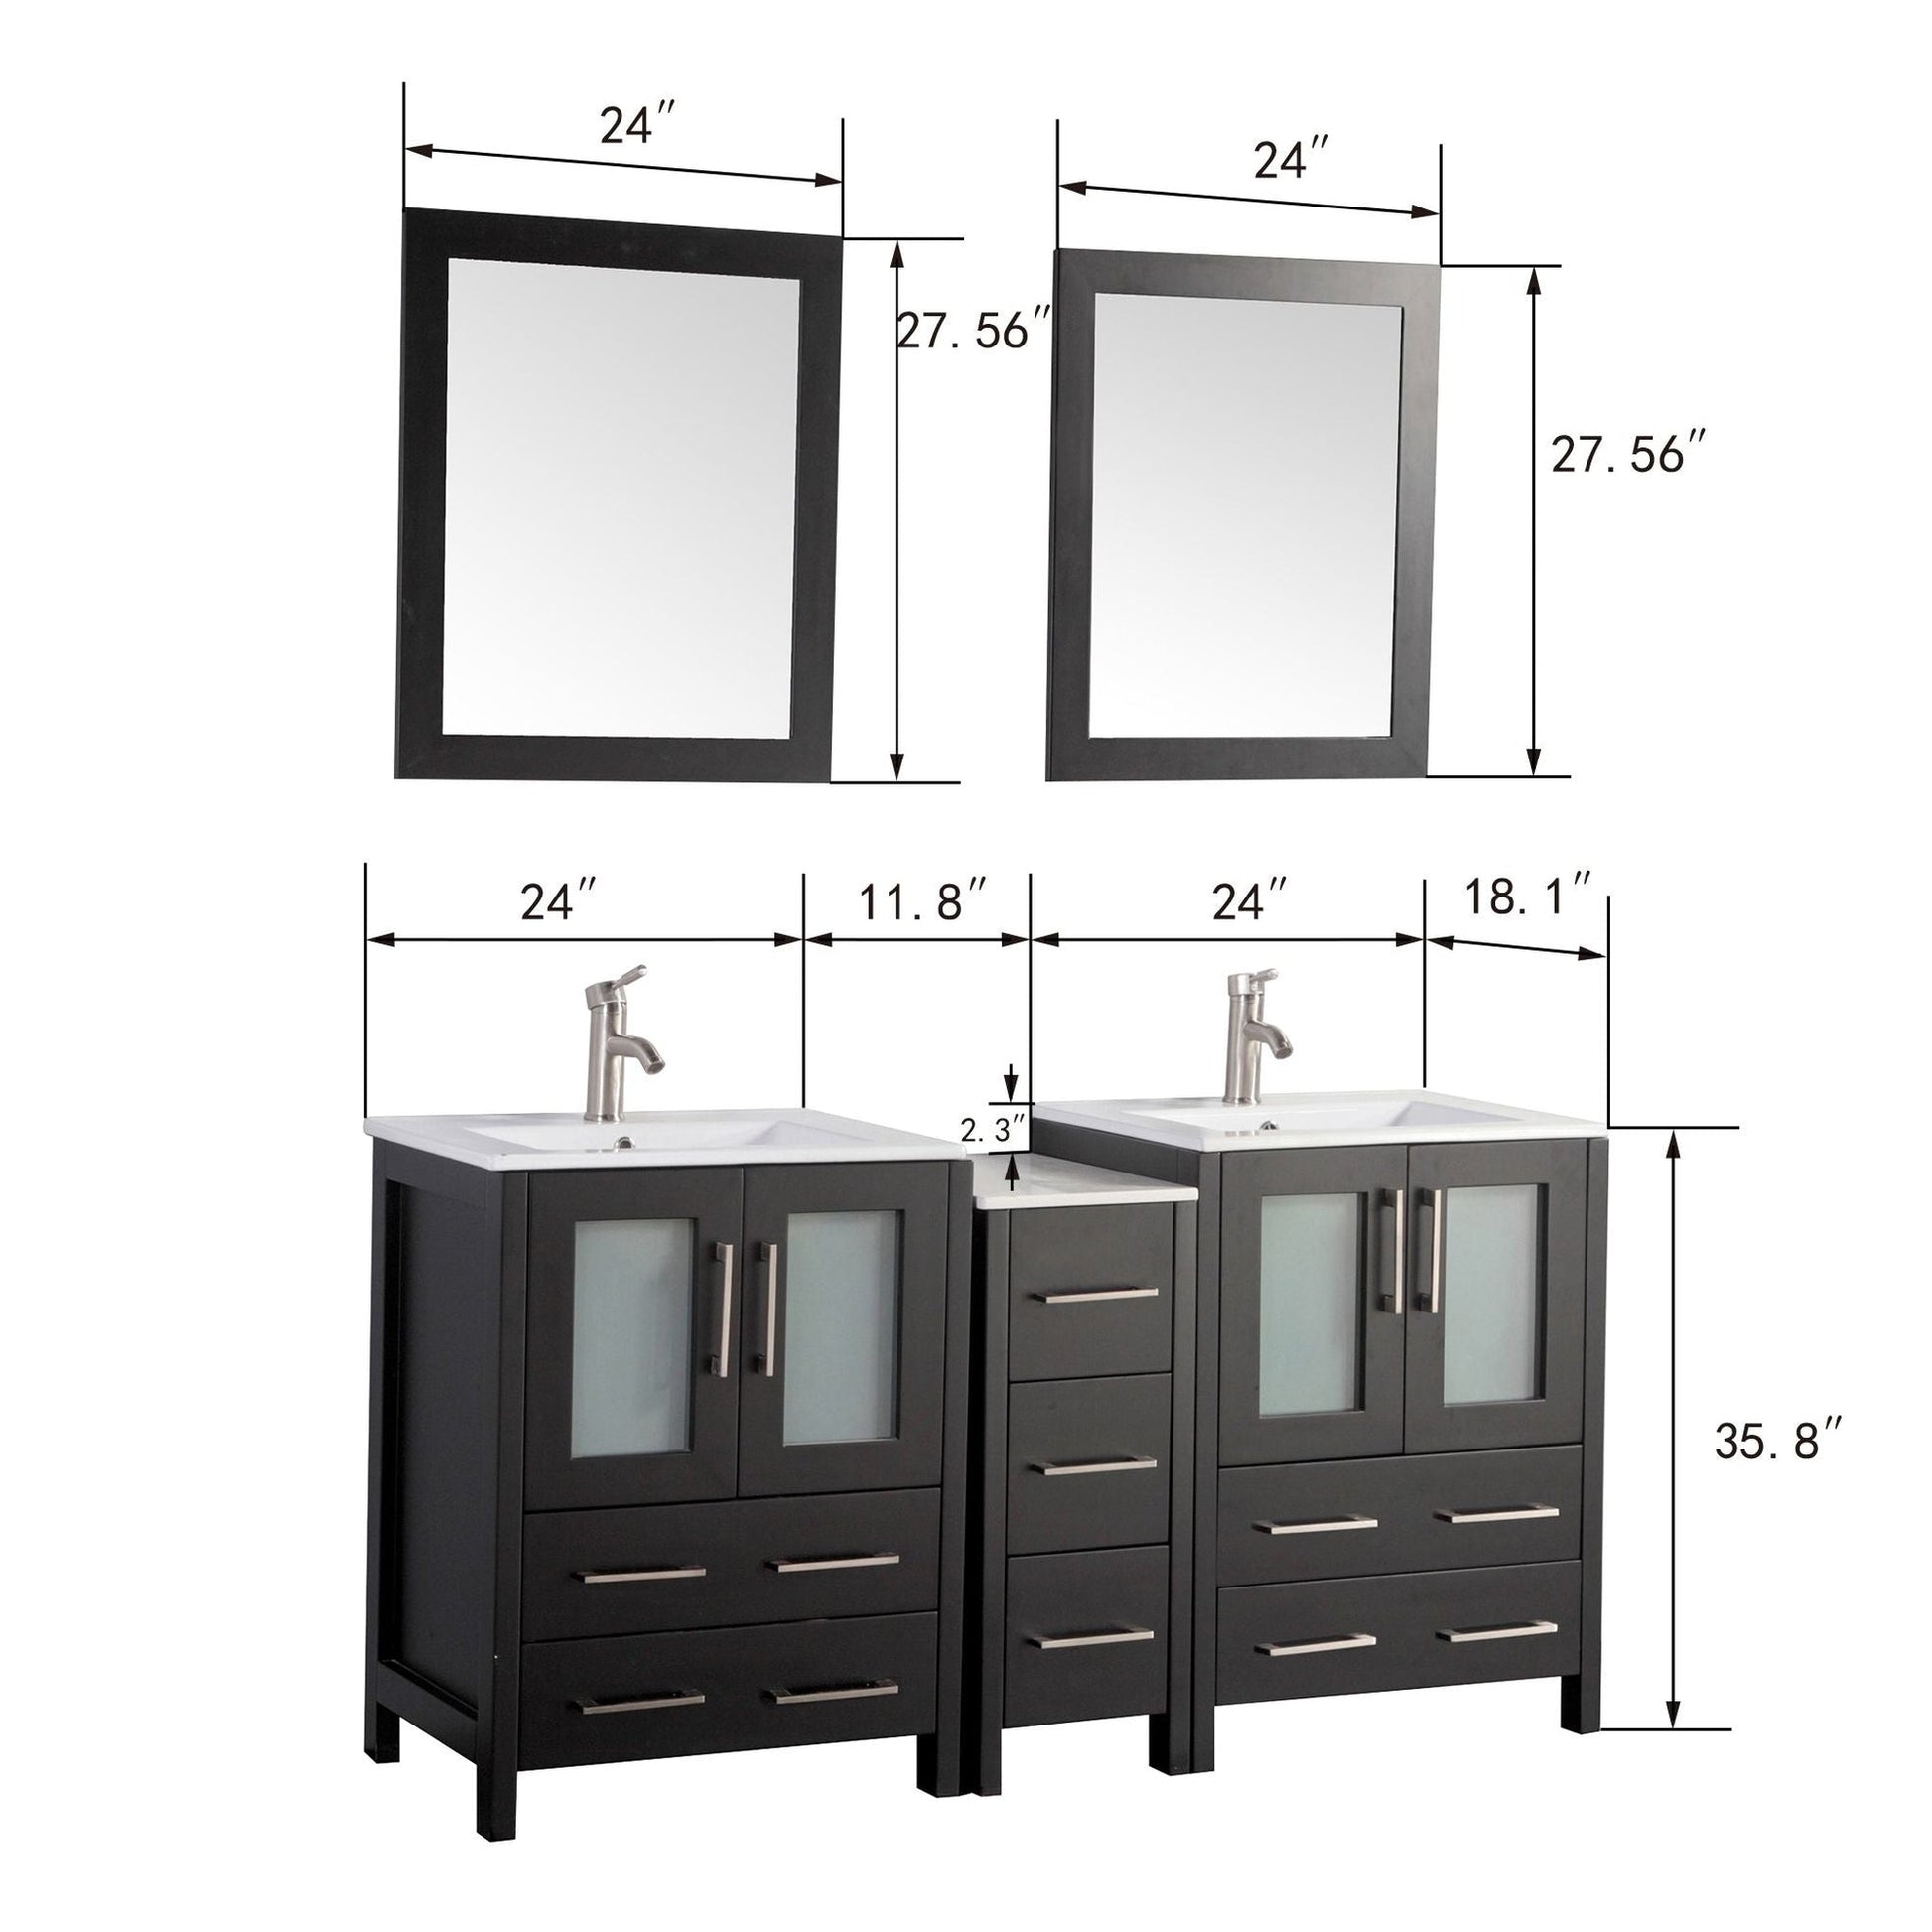 Vanity Art Brescia 60" Double Espresso Freestanding Vanity Set With Integrated Ceramic Sink, 1 Side Cabinet and 2 Mirrors